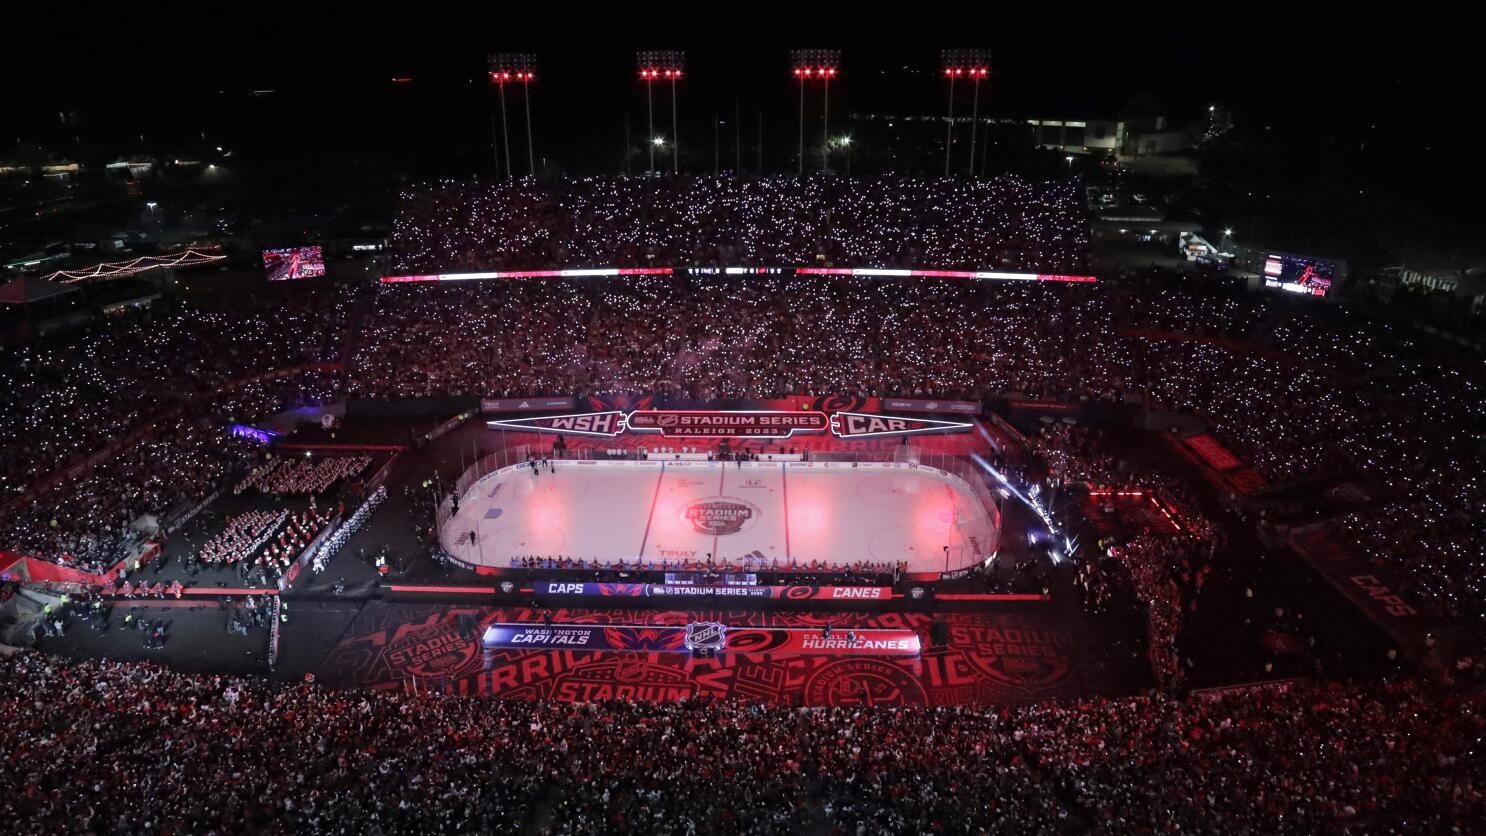 Hurricanes top Capitals 4-1 in Carolina's 1st outdoor game - The